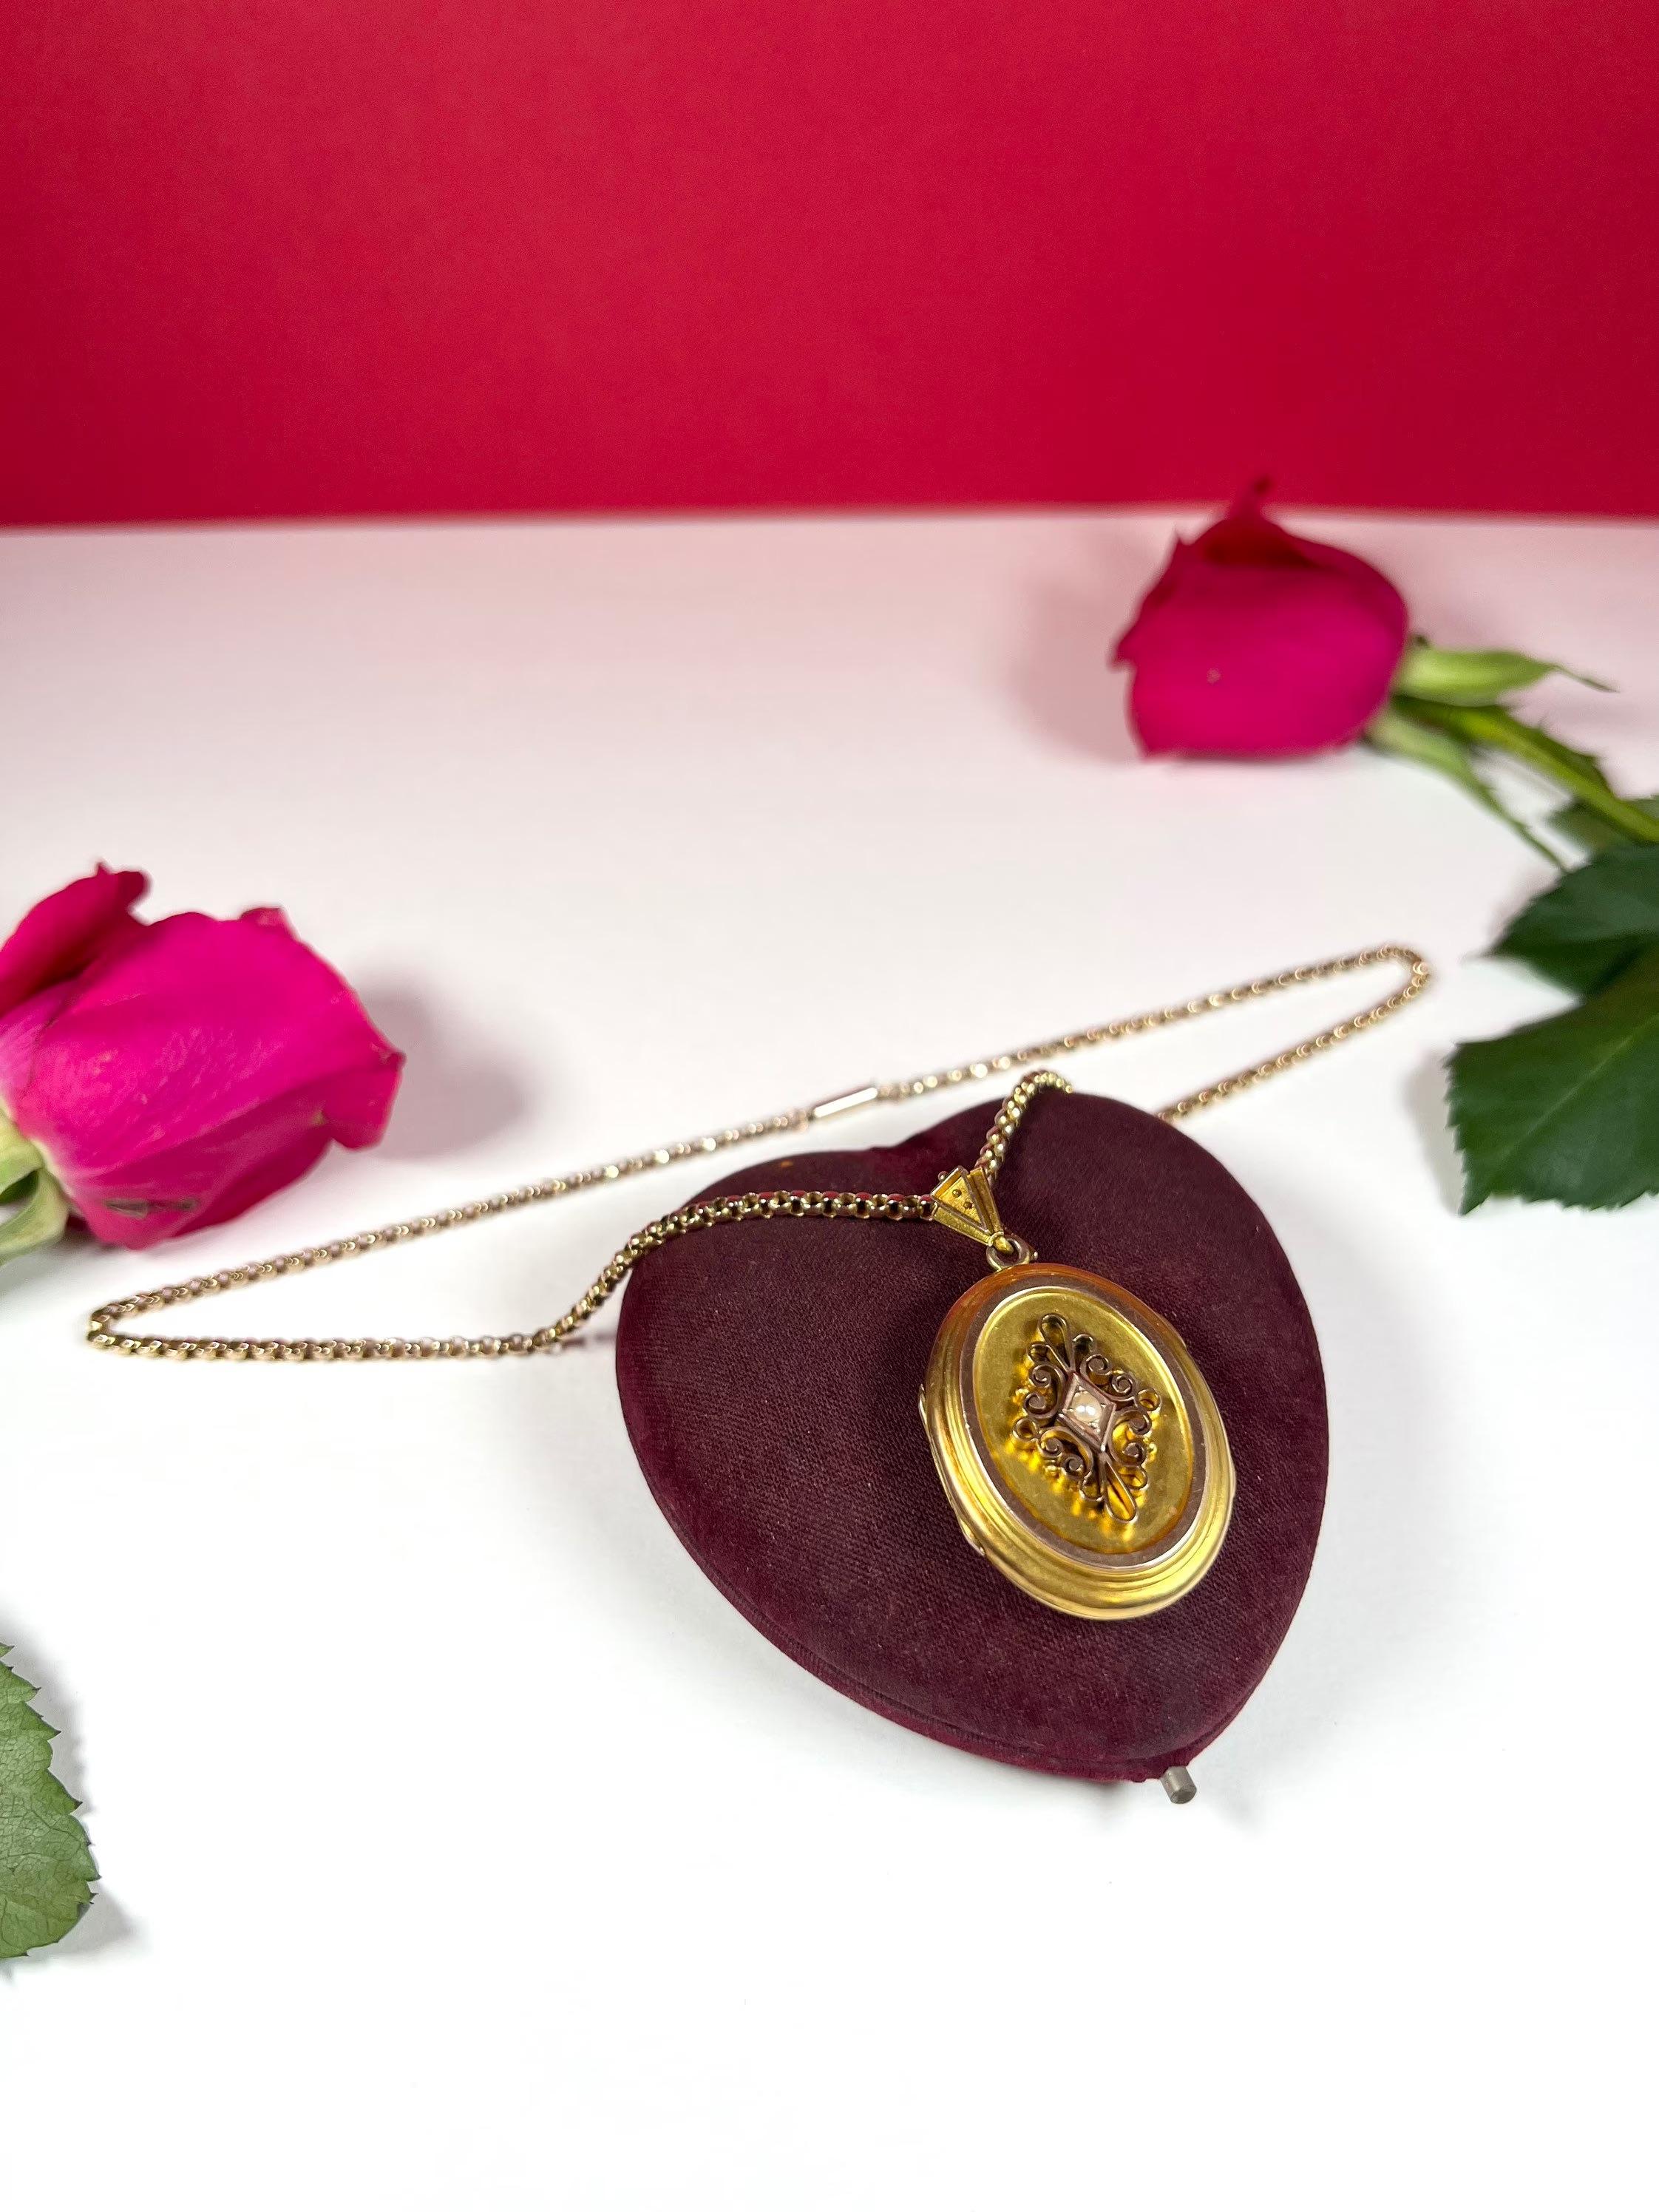 Antique Gold Locket

18ct Gold Tested

Circa 1880 

Beautiful, Victorian gold locket. Fabulous yellow gold work, set in an oval frame with a pretty natural seed pearl centre. In lovely condition for its age. 

Measure approx height 51mm (inc bail) &